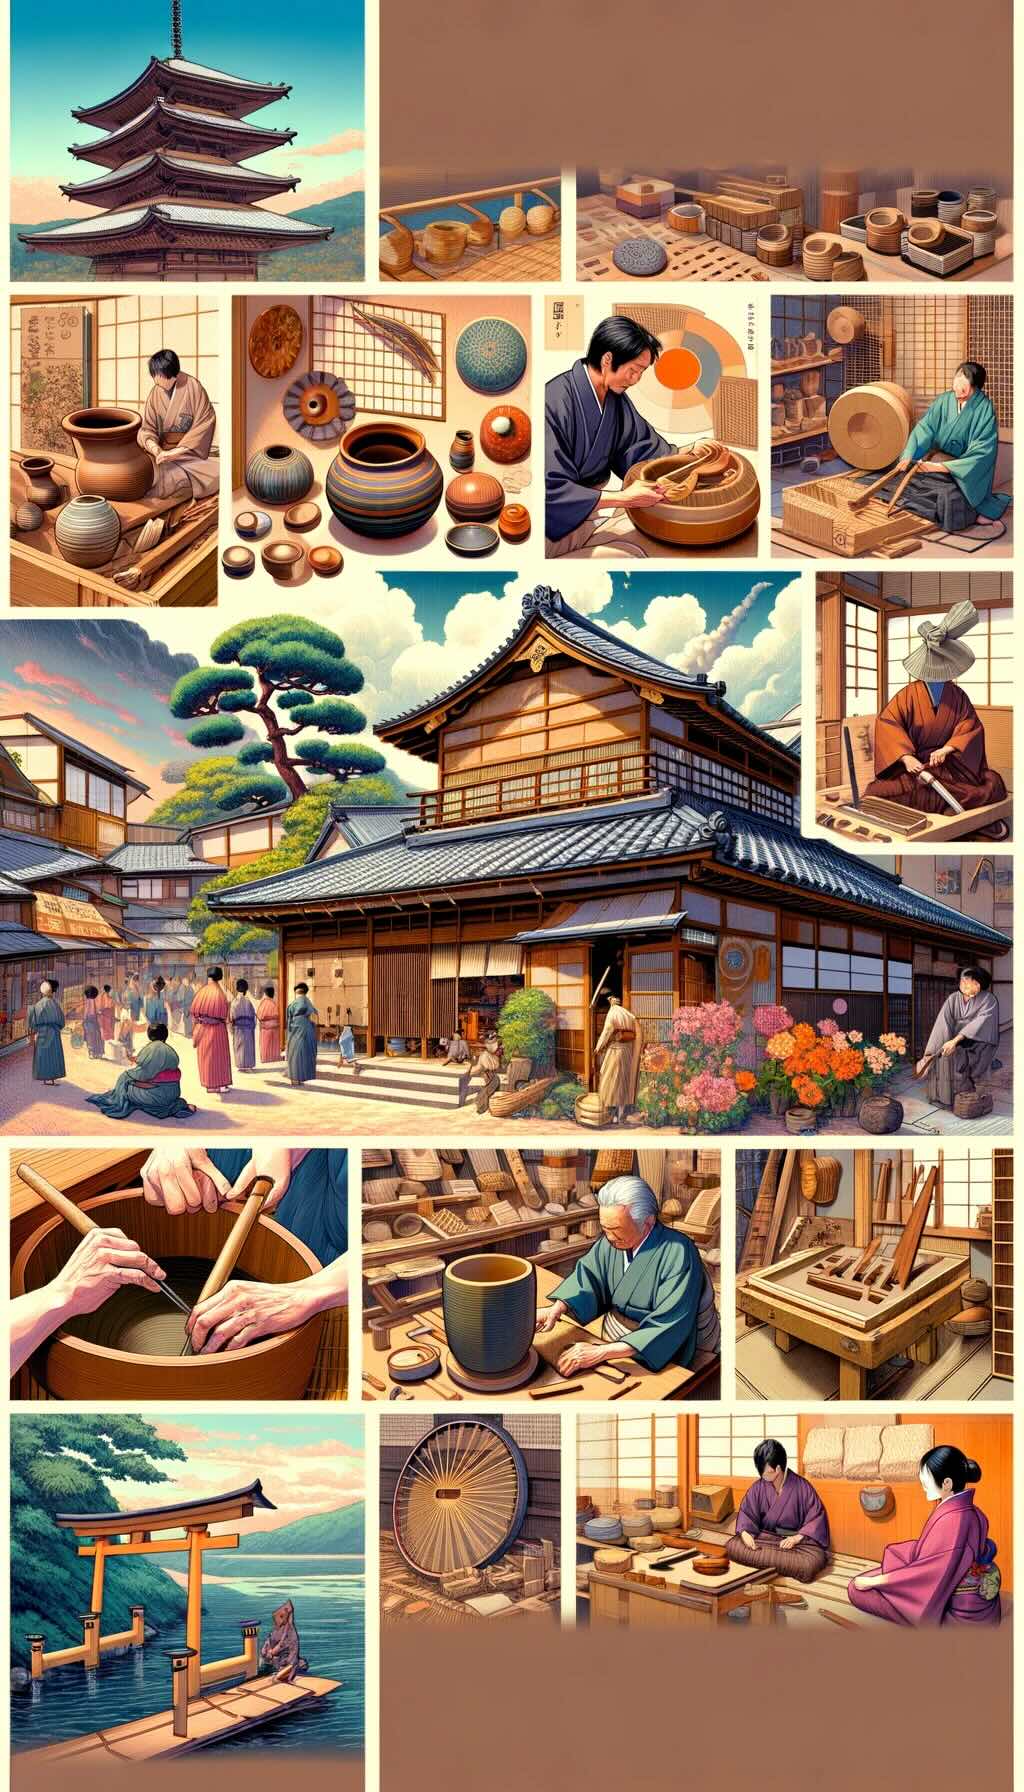 Various aspects of Japanese craftsmanship vividly portrays traditional Japanese craft workshops and experiences, capturing the essence and cultural richness of these art forms.